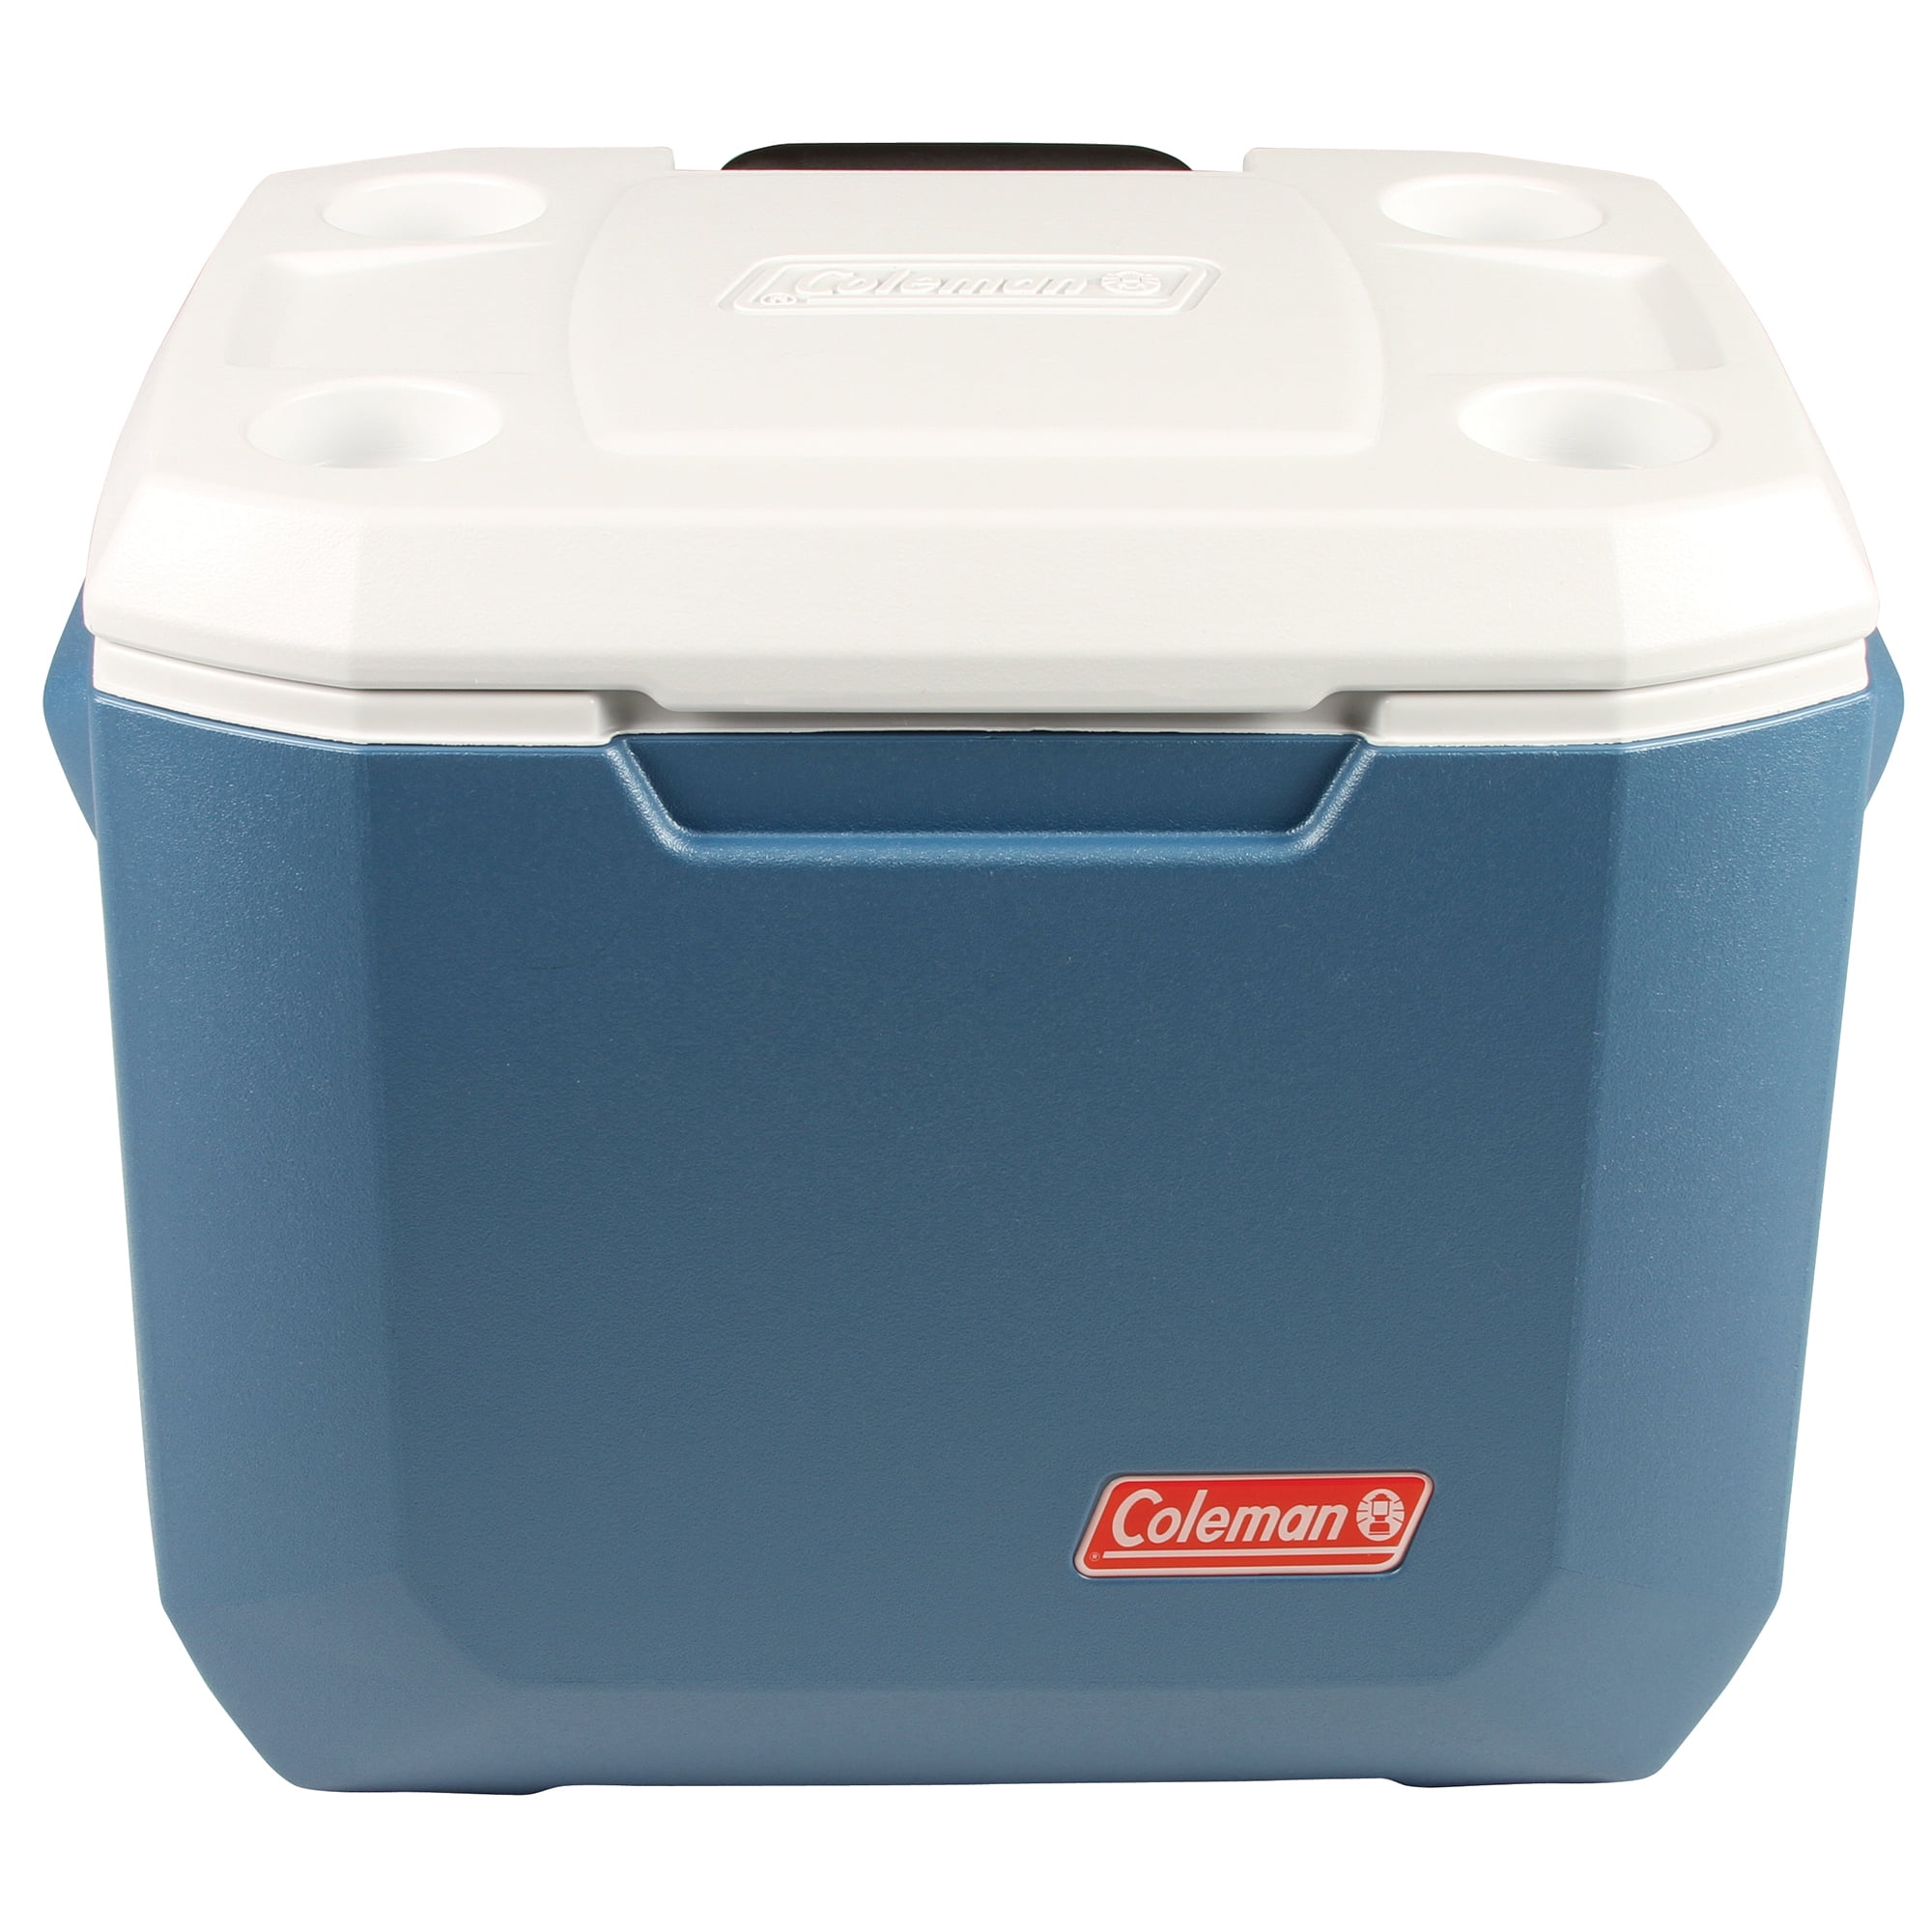 Large Cooler Coleman 120 Quart Cold Ice Chest Insulated Fishing Xtreme Storage 